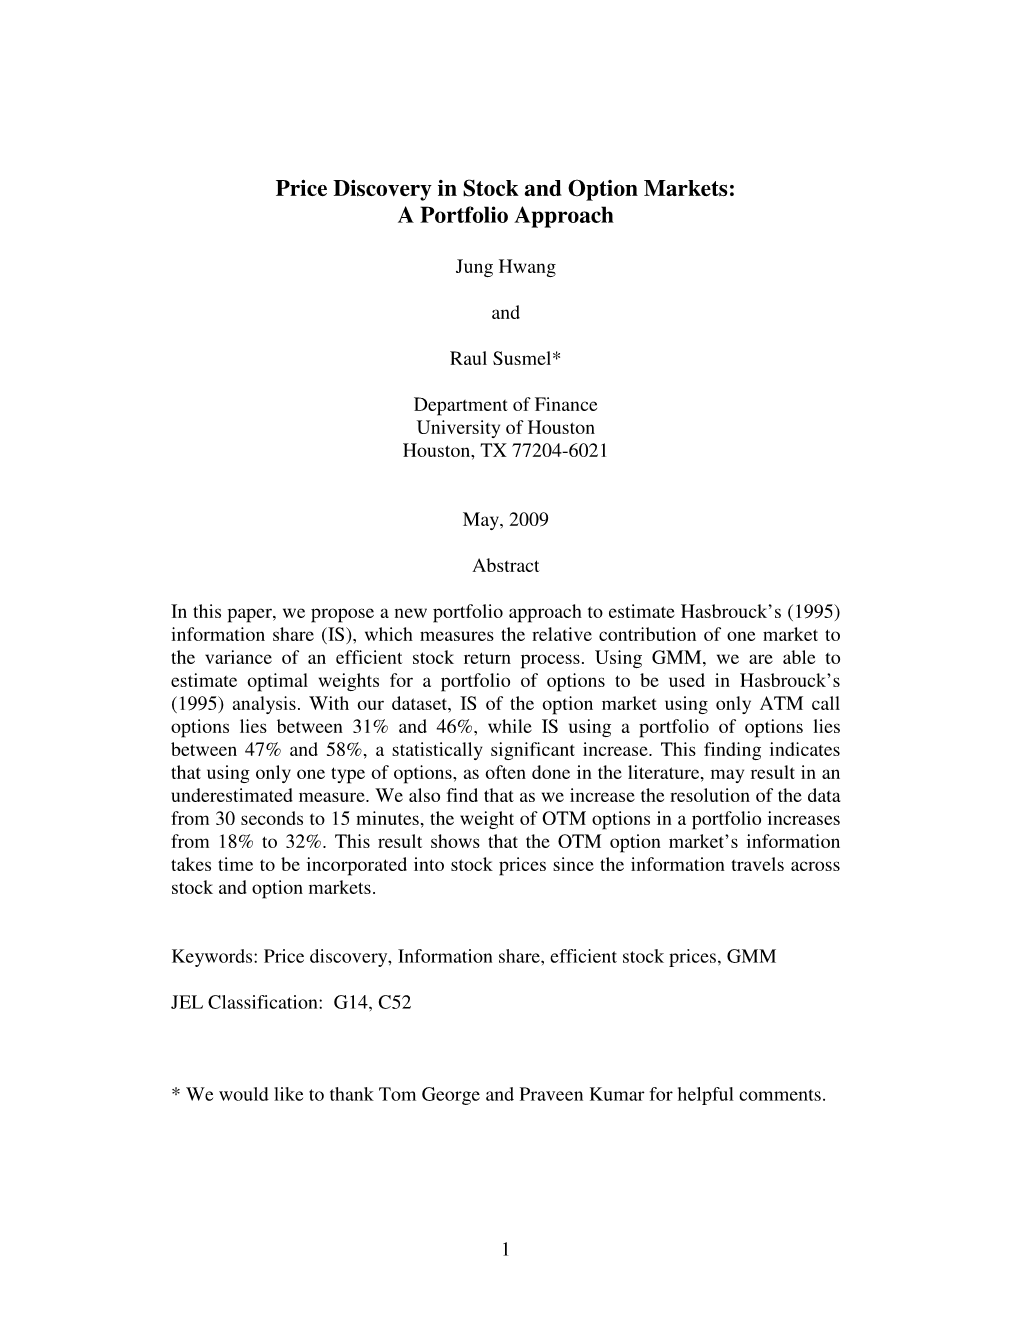 Price Discovery in Stock and Option Markets: a Portfolio Approach